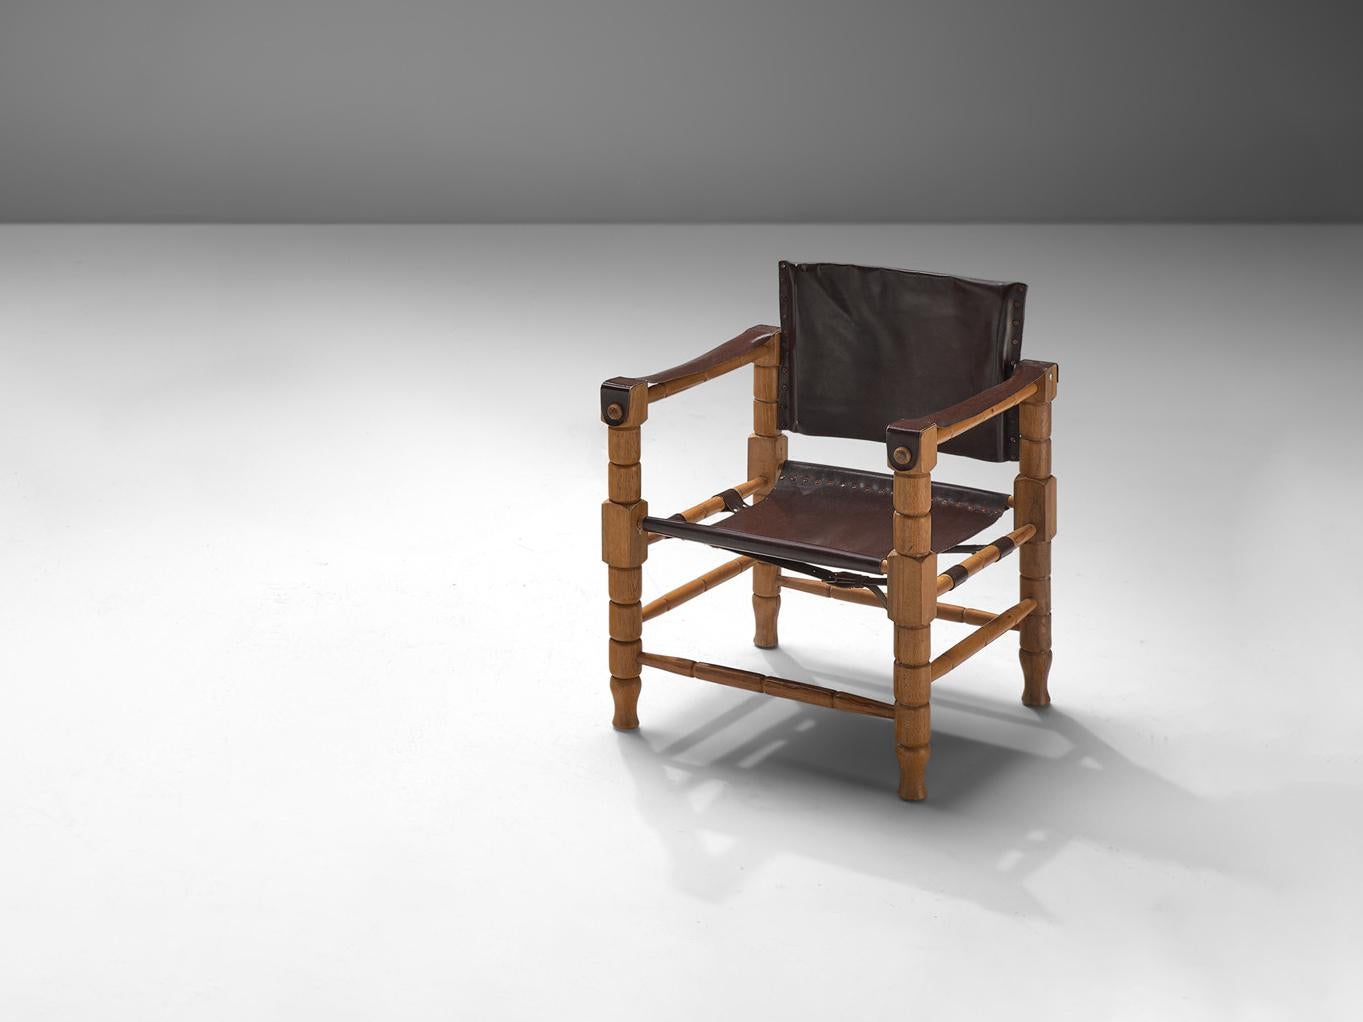 Safari chair, stained beech, leather, metal, Europe, 1970s

A safari chair made in beech and leather, manufactured in Europe in the 1970s. This design is very robust yet stately in its appearance. This design features a wonderfully carved wooden